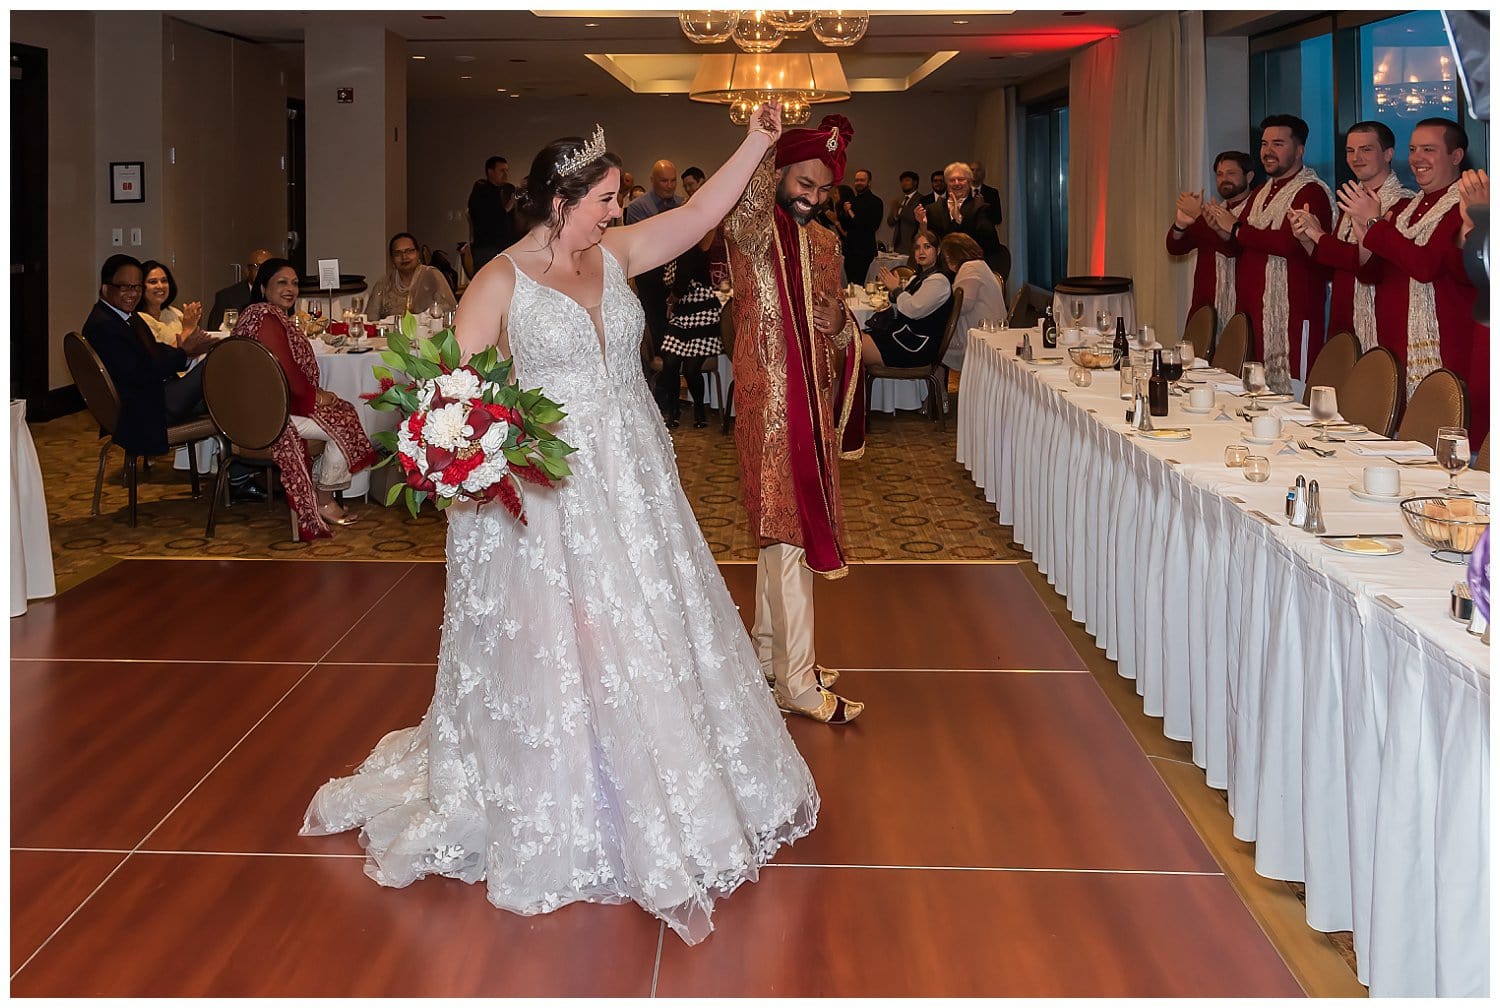 The bride and groom make their entrance to the wedding reception at Halifax Marriott Harbourfront Hotel.